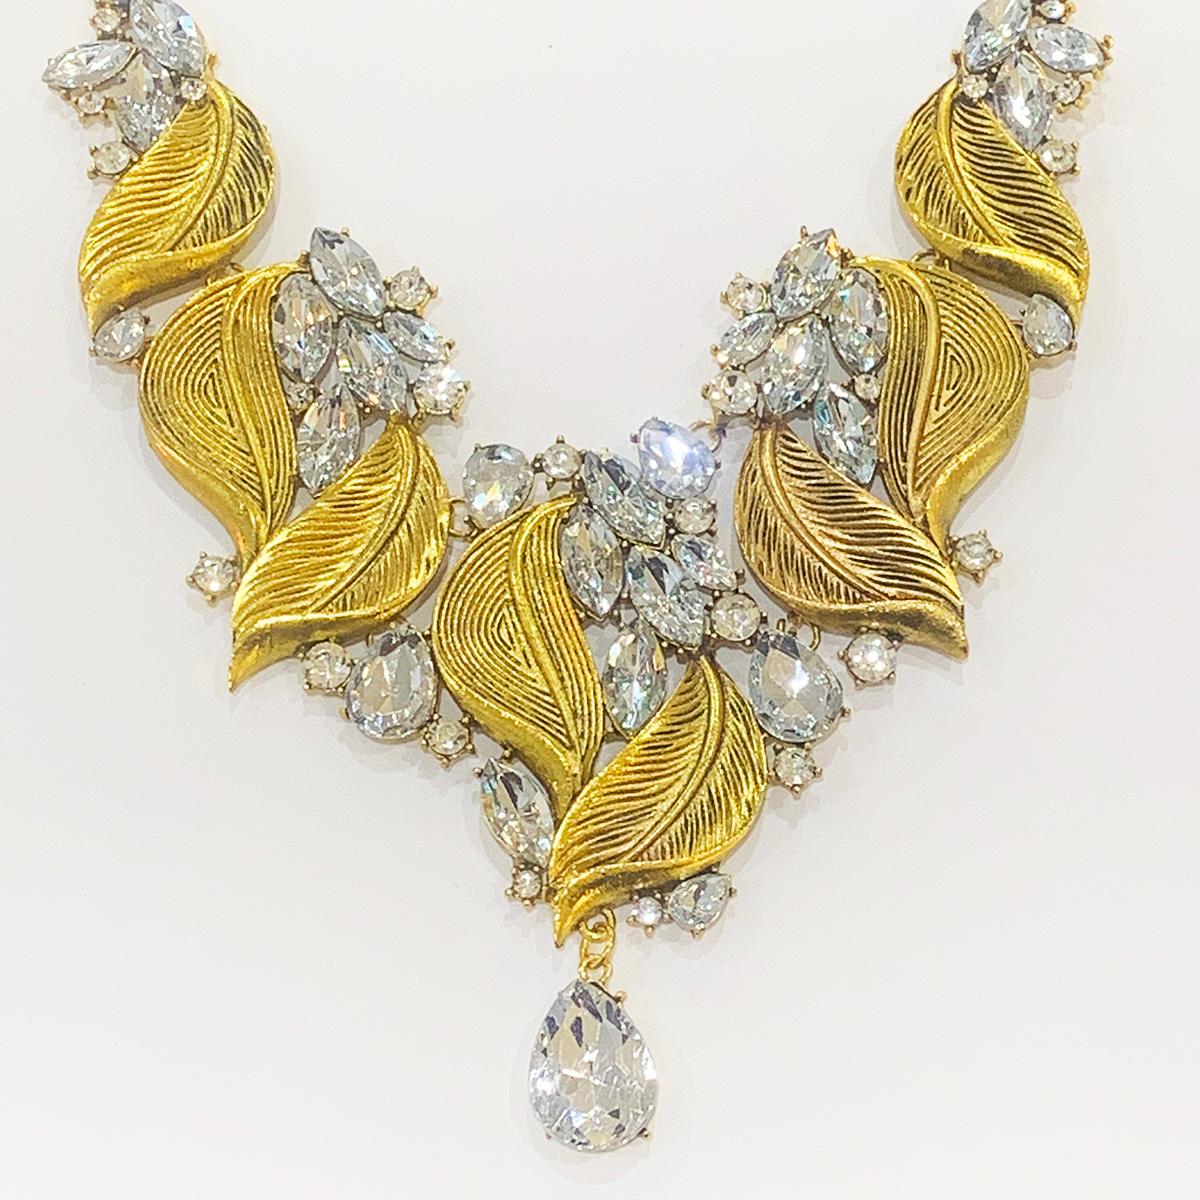 Genuine Oscar De La Renta Necklace Gilt Leaves with White Mirror Diamantes, in elongated octagonal shape of different sizes and a larger pendant with large white crystal Teardrop diamante. The  “pendant” area is made of 5 segments; 1 decorated leaf